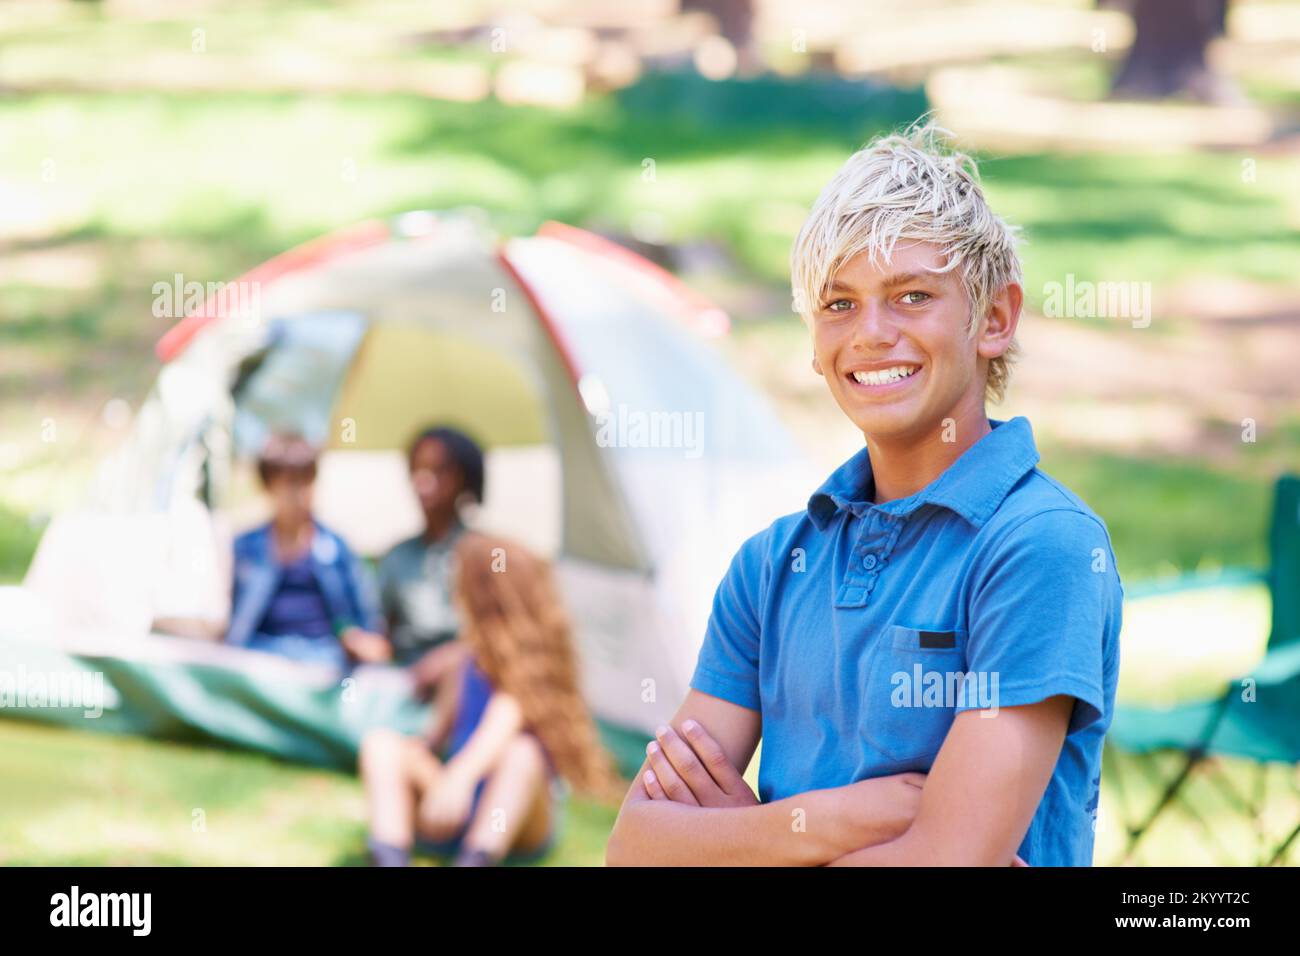 Claiming his camping spot. A boy standing in front of his campsite. Stock Photo